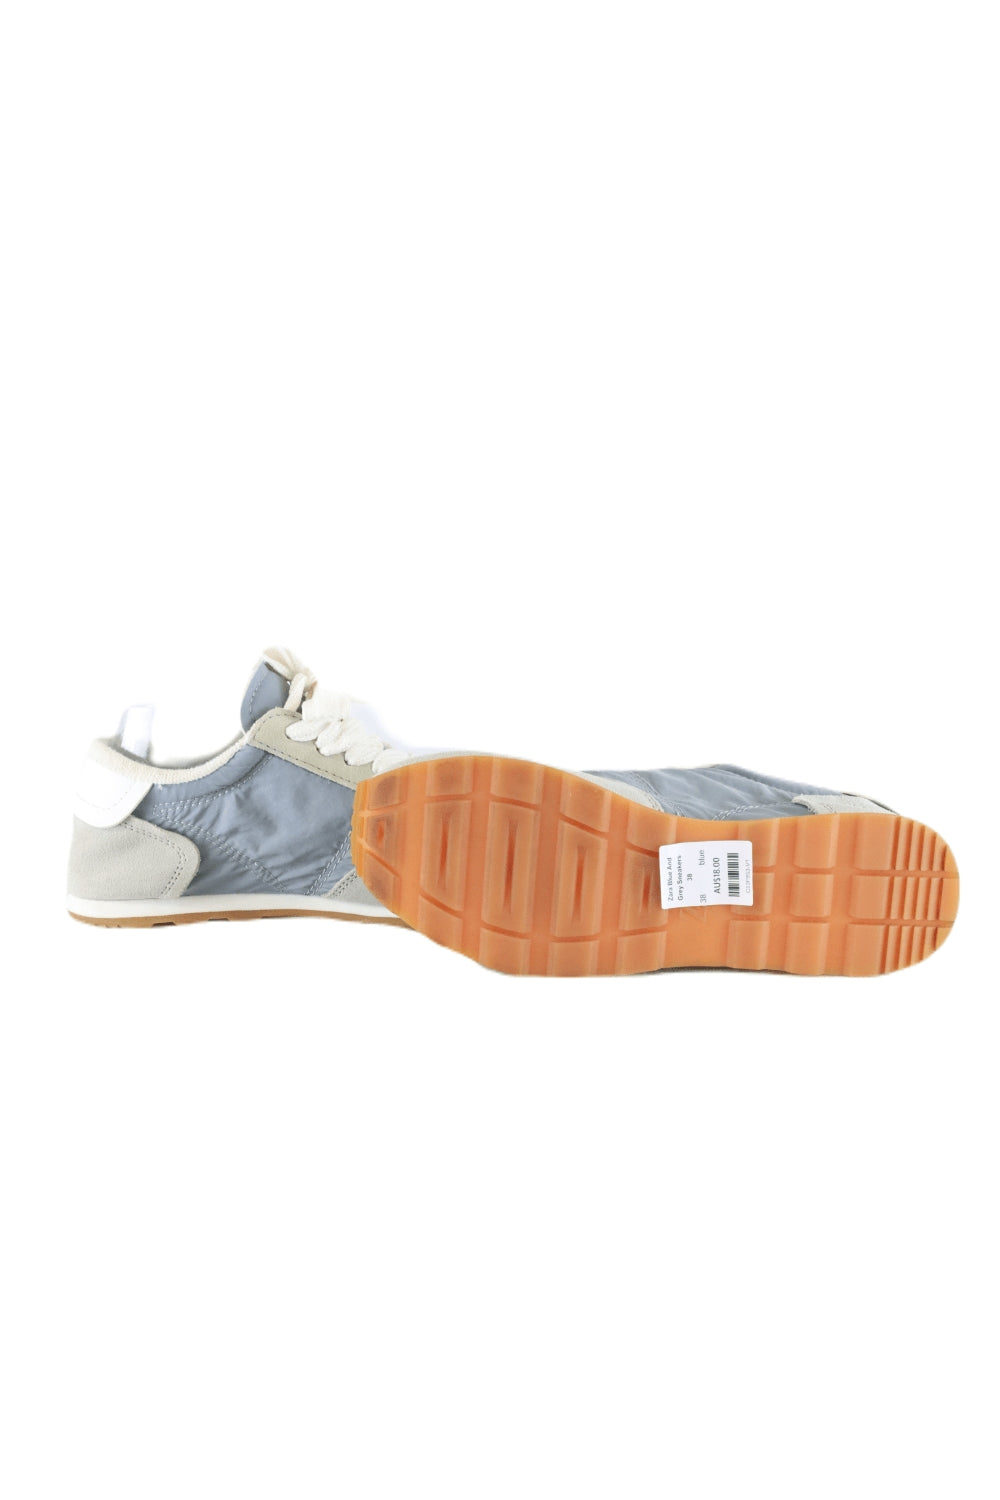 Zara Blue And Grey Sneakers 38